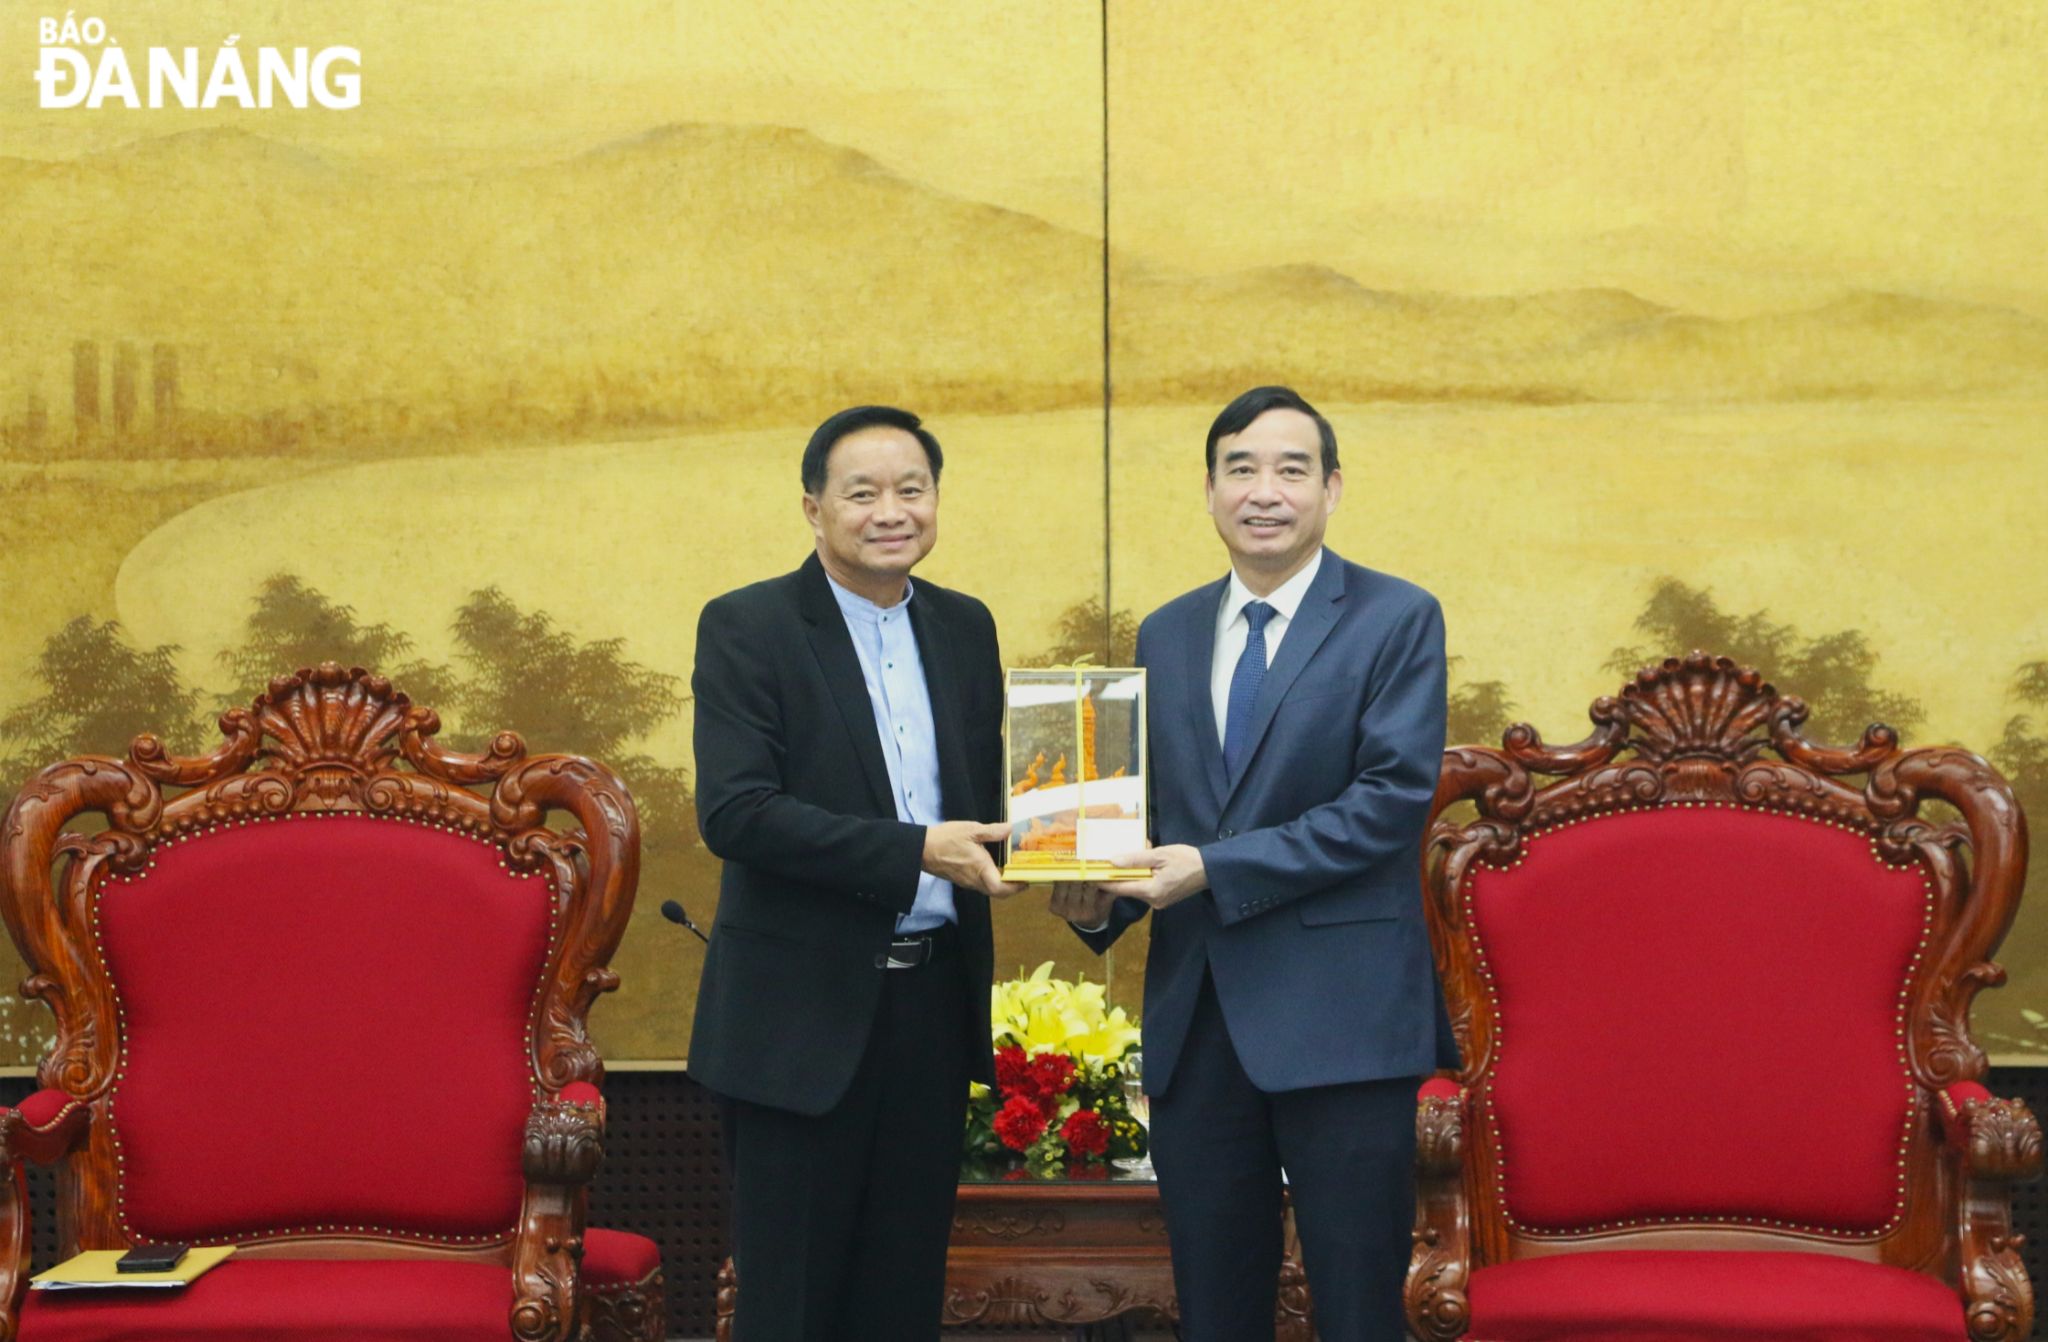 Mr. Supasit Kocharoenyos, Governor of Ubon Ratchathani Province in Thailand (left) presents a souvenir to Chairman of the Da Nang People's Committee Le Trung Chinh. Photo: T.PHUONG